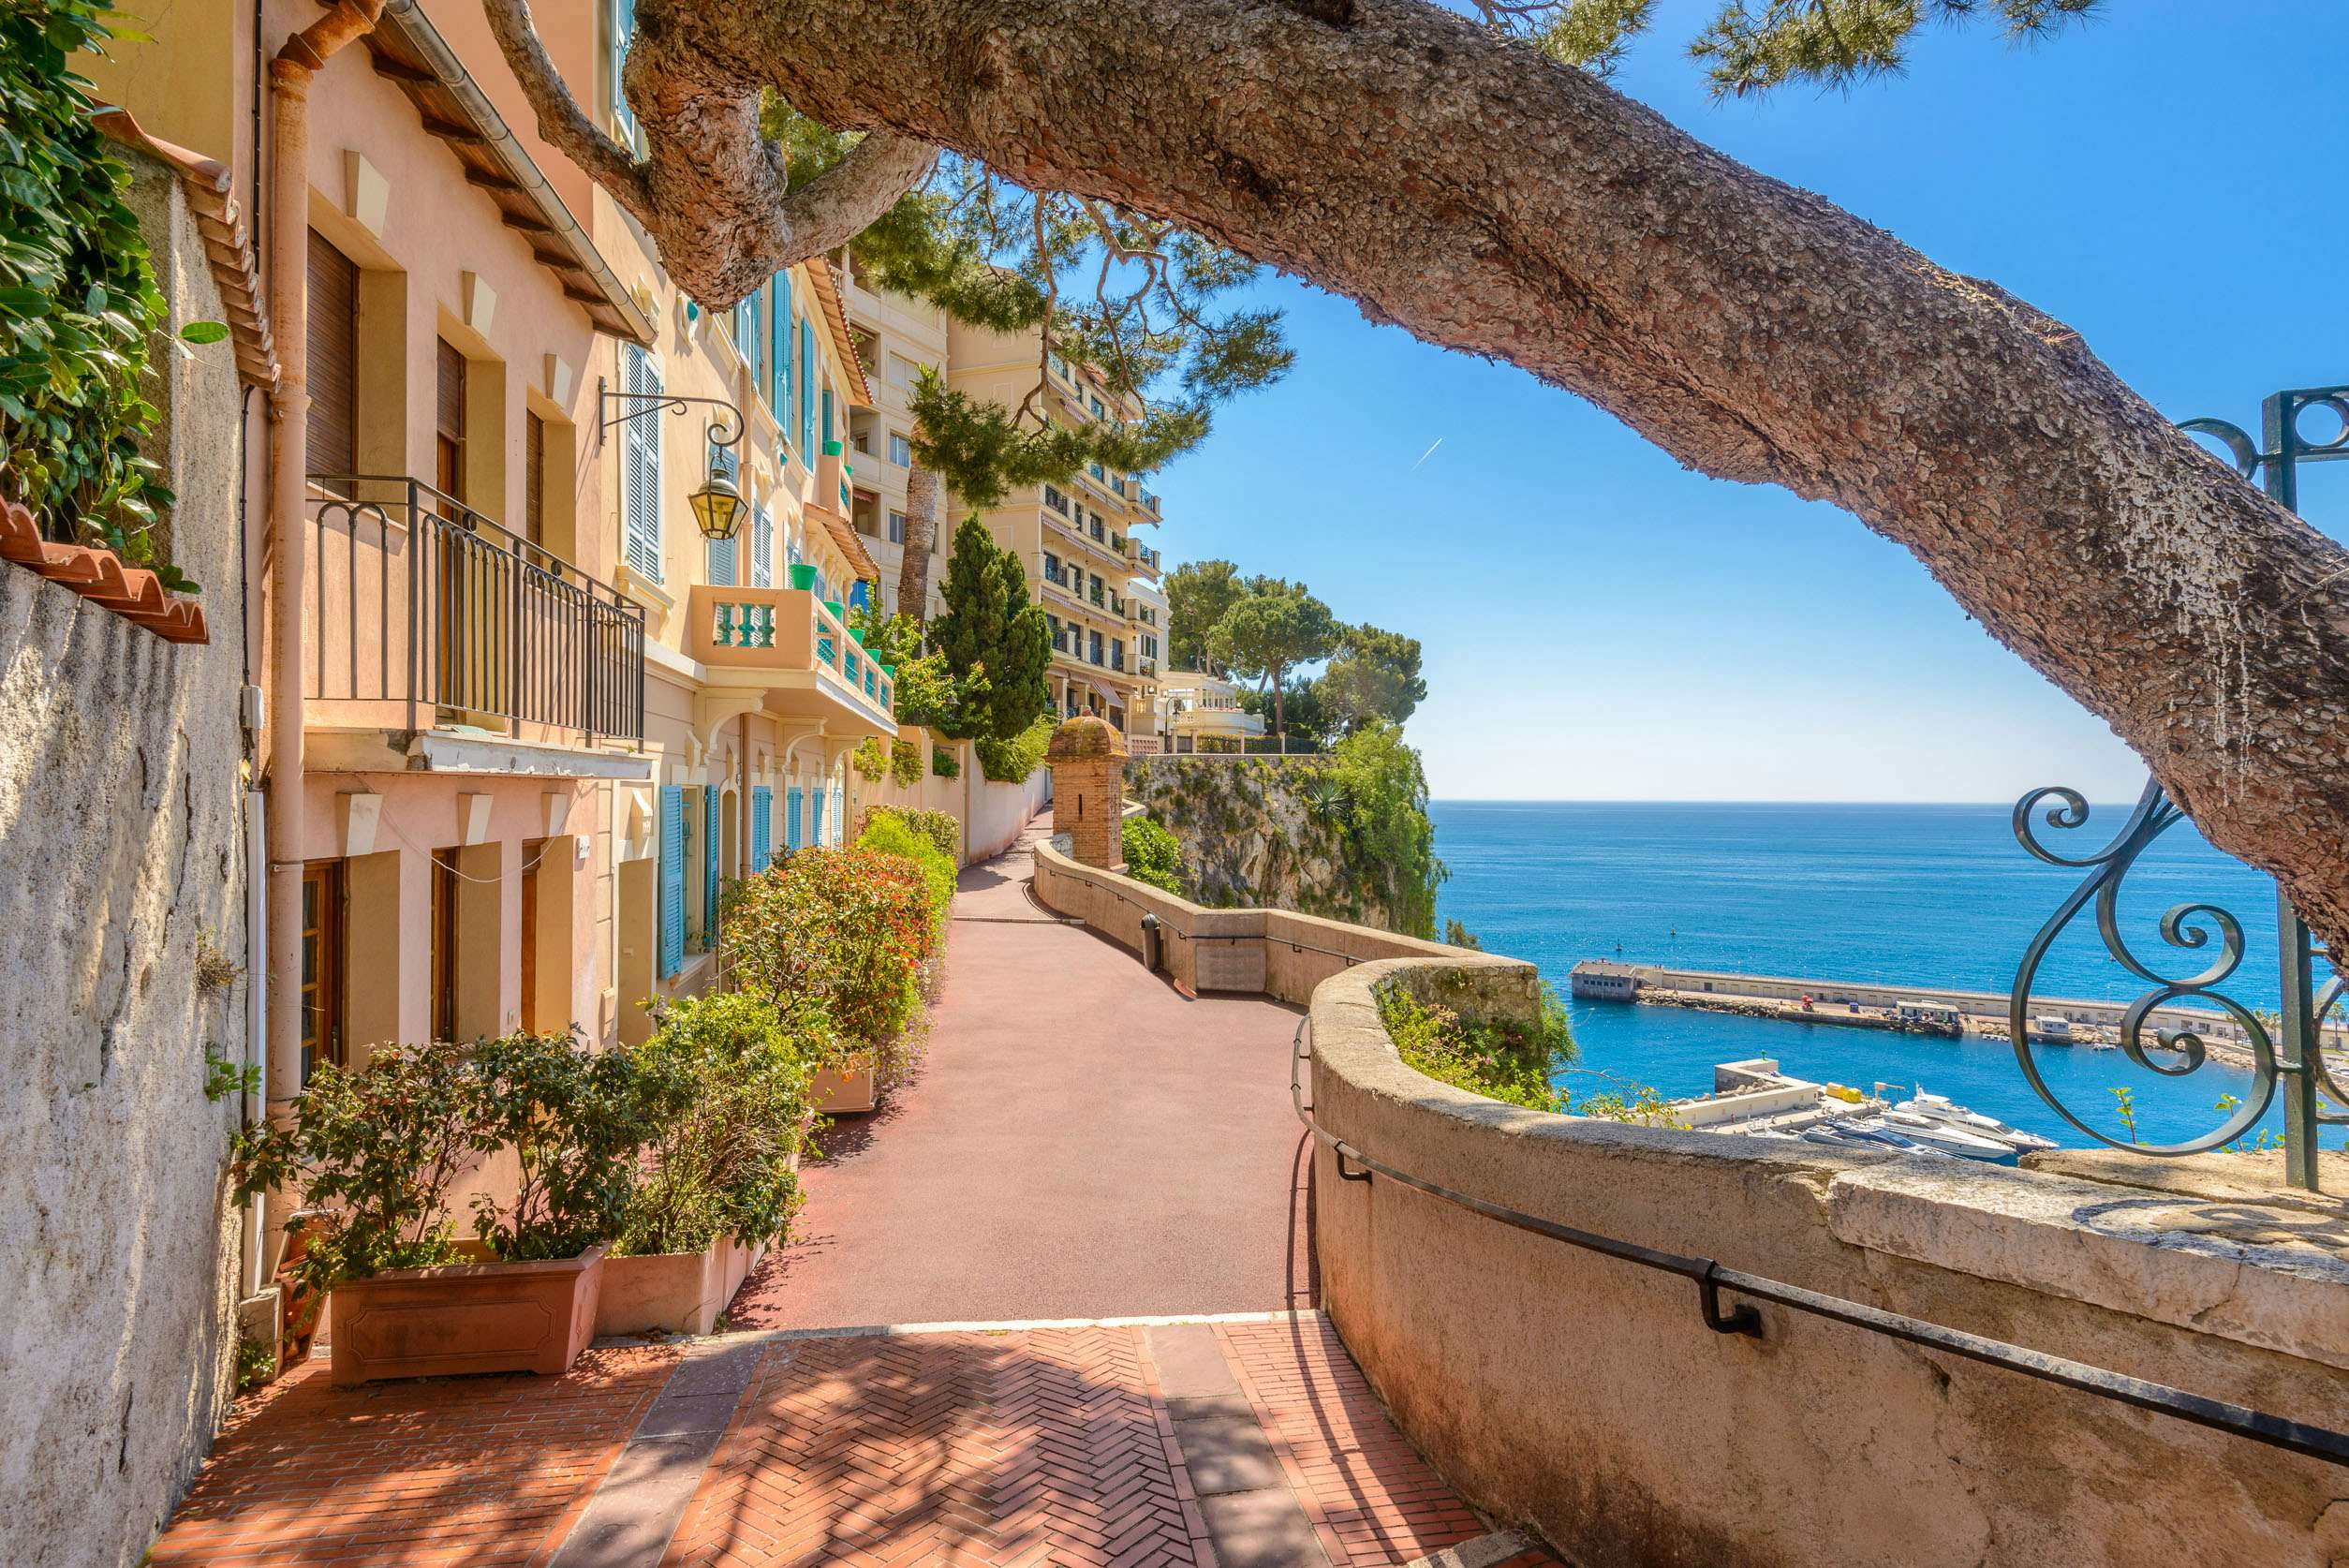 View from a seaside terrace in Monte Carlo, overlooking the Mediterranean Sea, perfect for Monaco yacht charter guests.